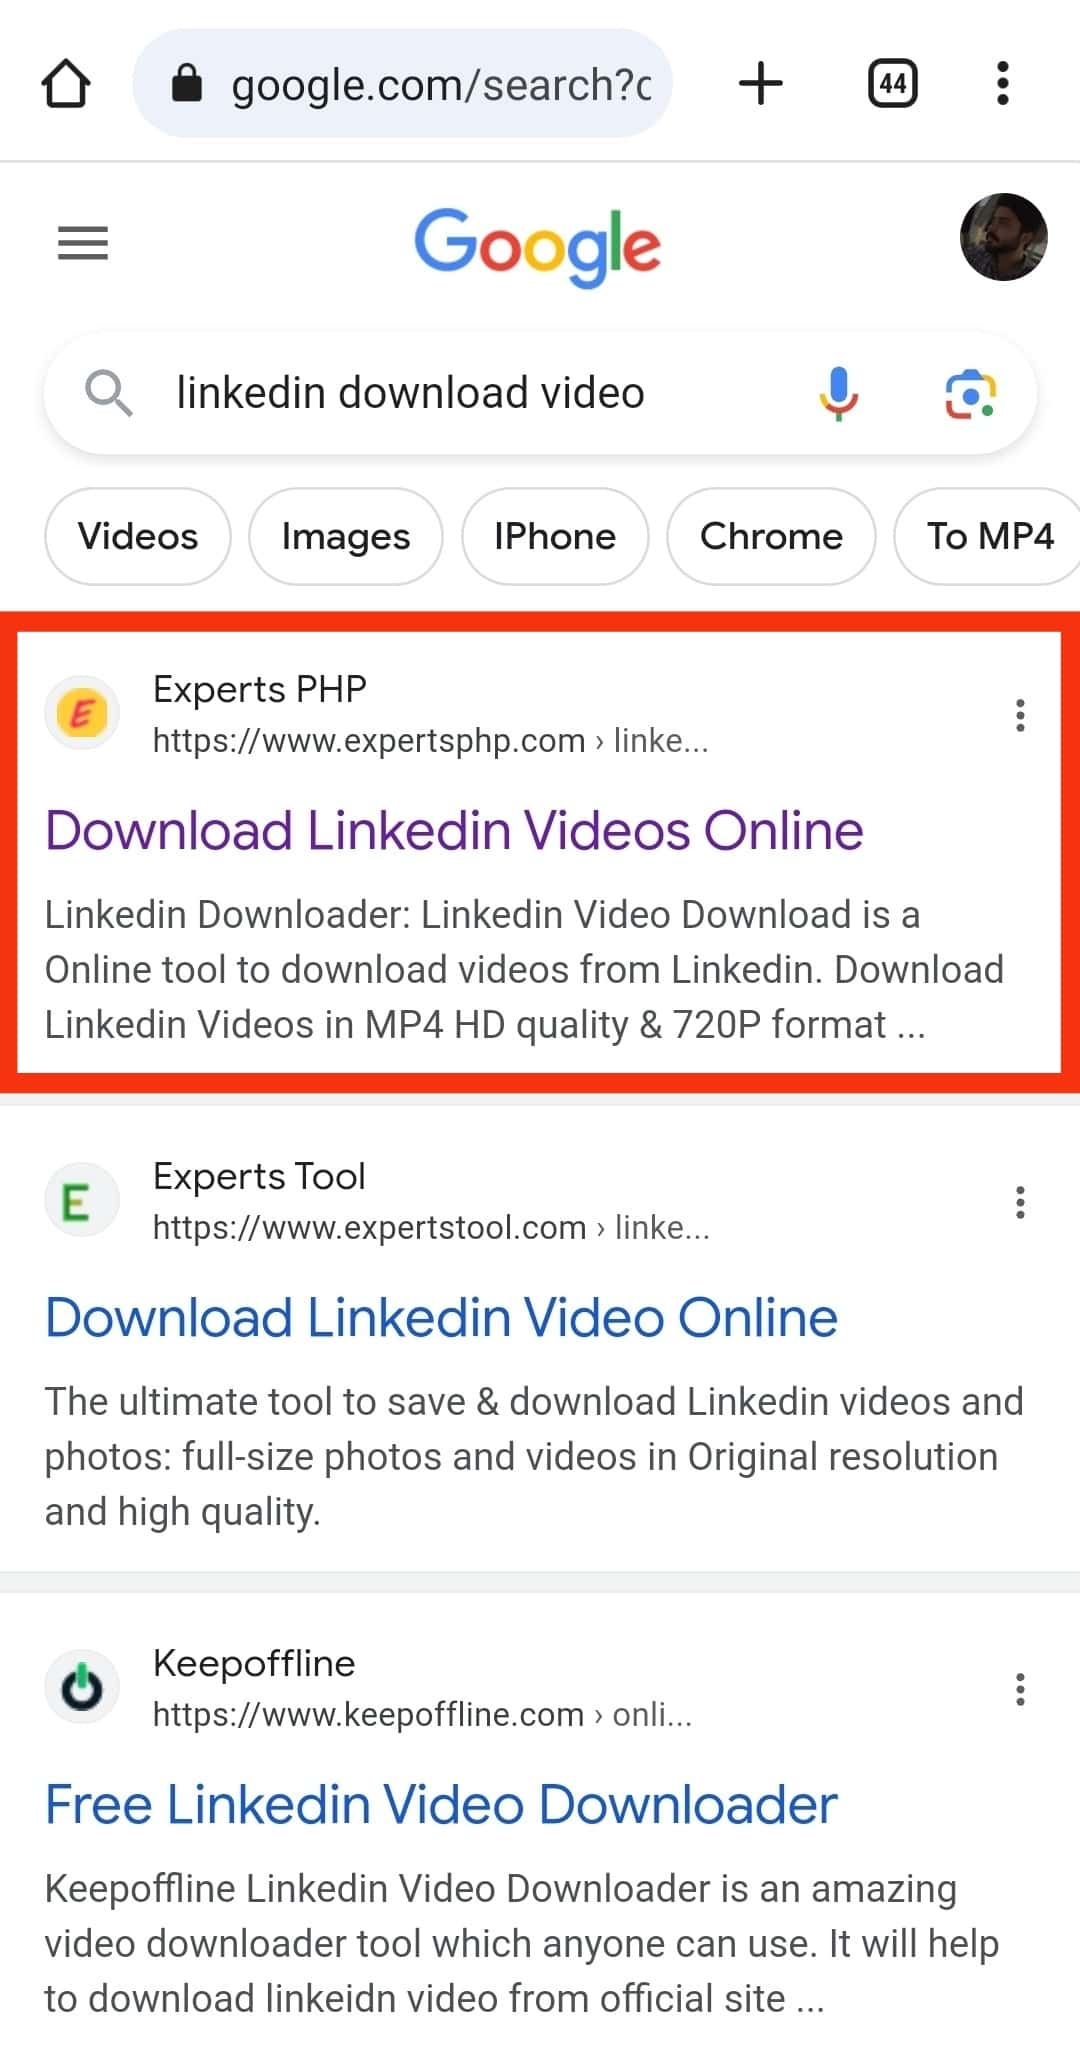 Search For The Linkedin Video Downloader Tool And Select One.